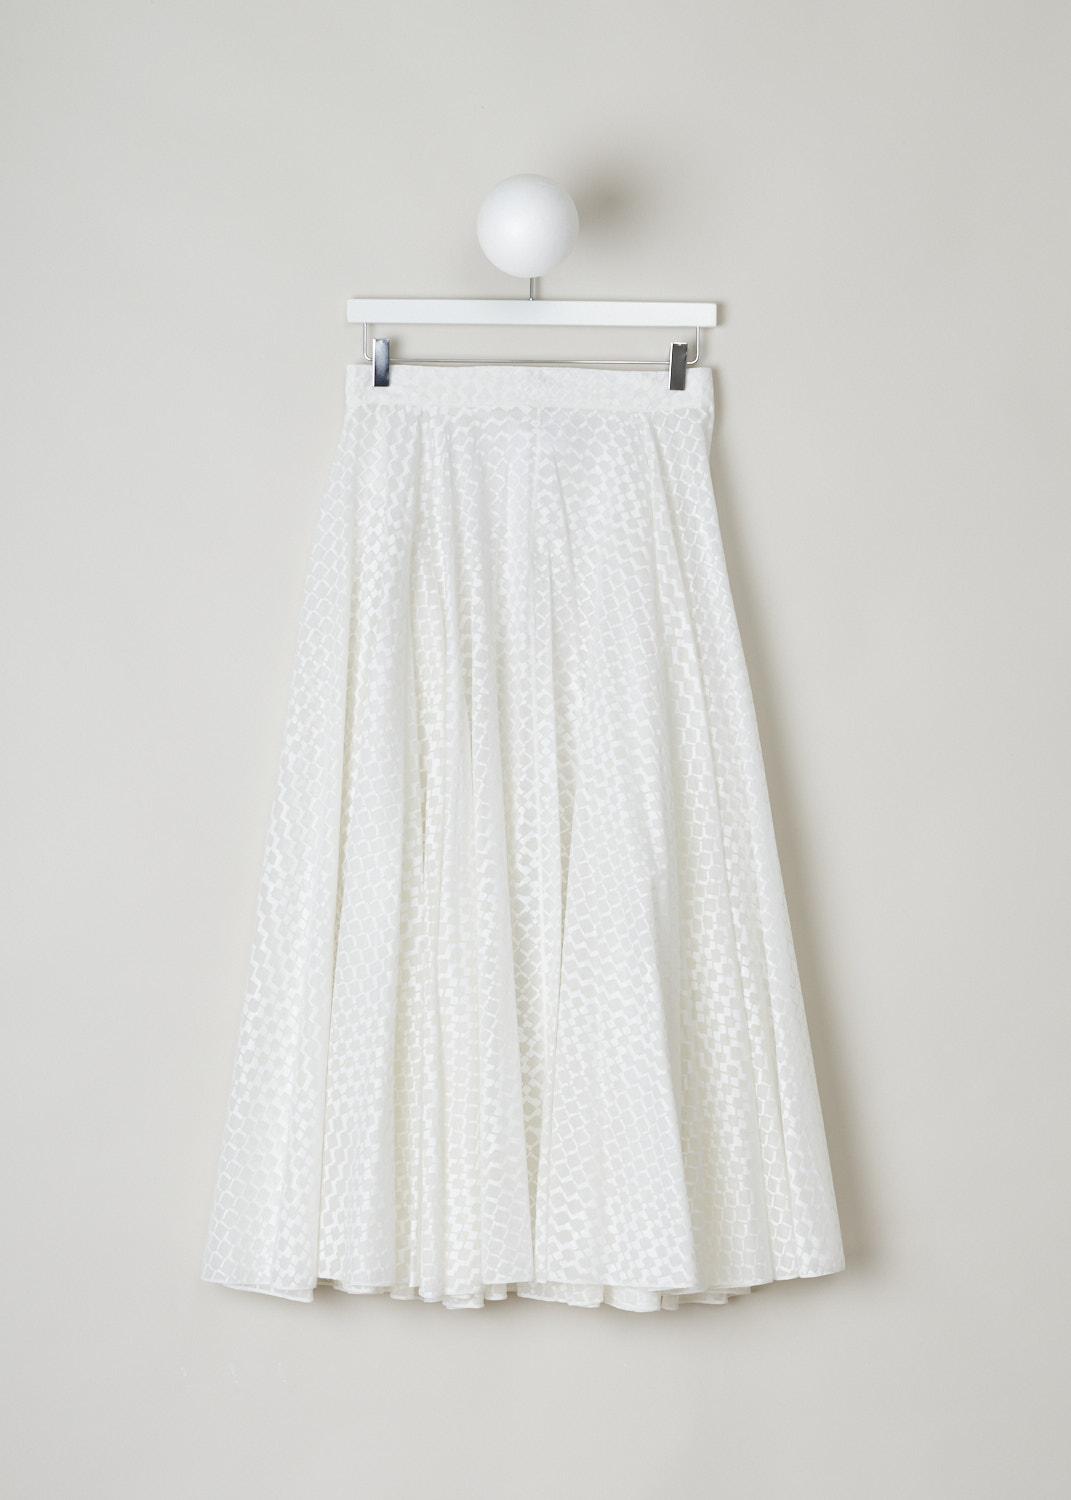 AlaÃ¯a, Off-white slightly see-through tulle skirt, AS9J648TT314_C000_blanc, white, front, Made from thinly woven cotton and is slightly see-through, embellished with a white lozenge motif. The length of the skirt comes to about ankle height.